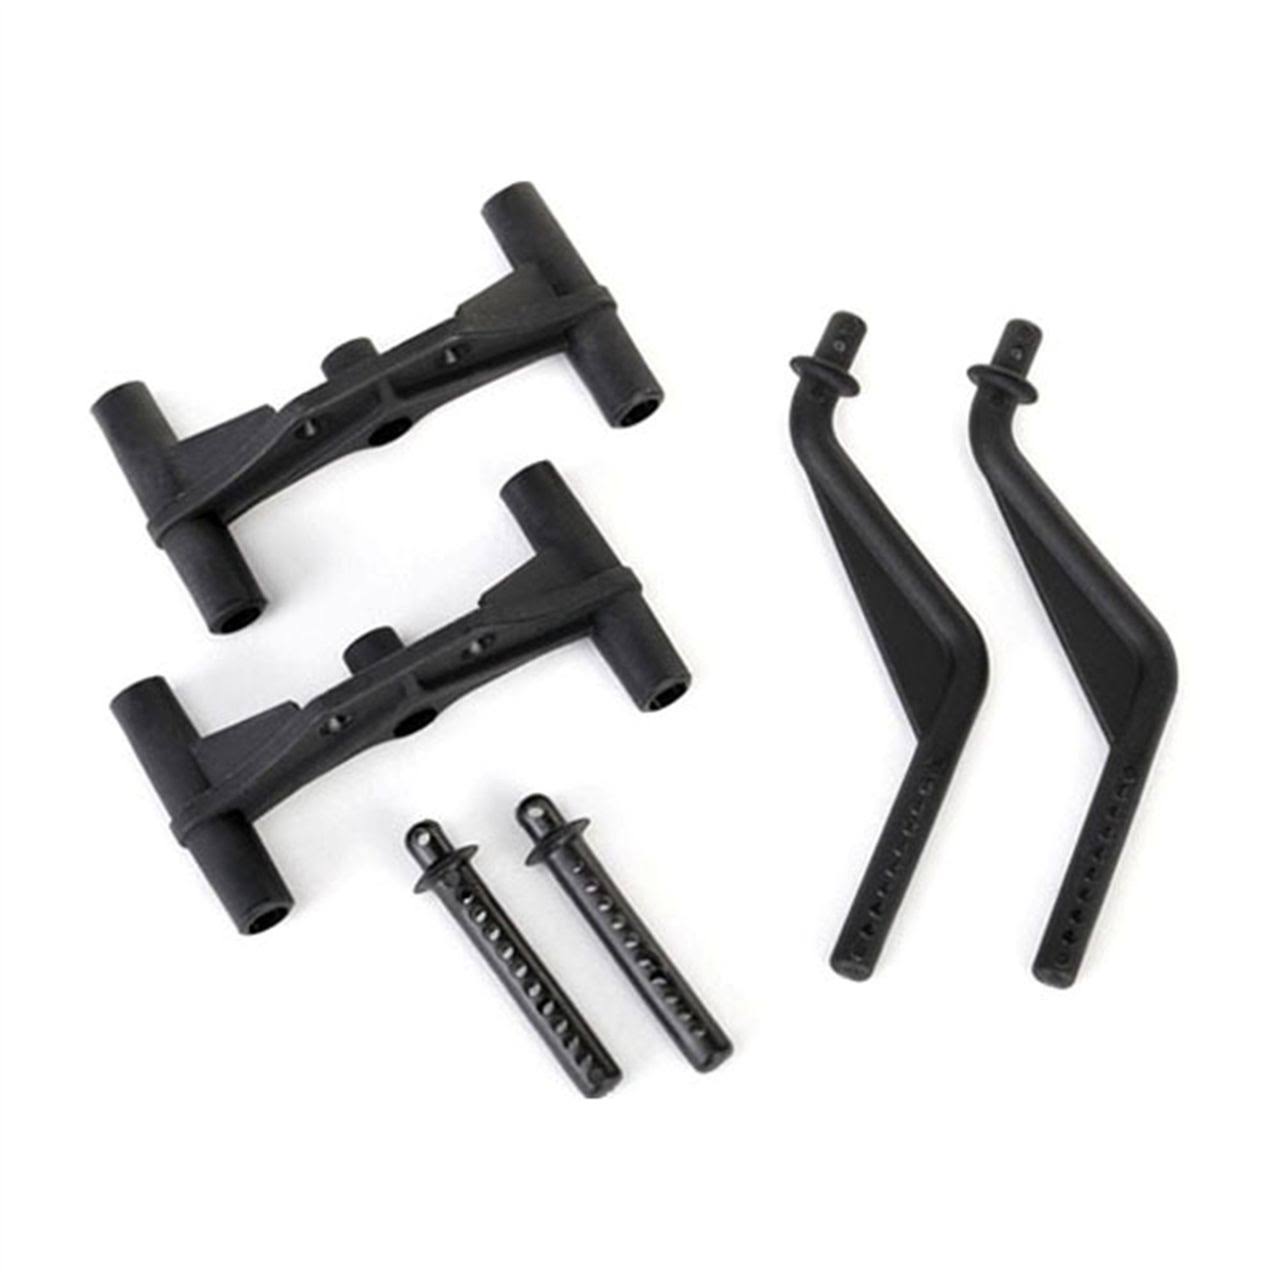 Traxxas Tra7516 LaTrax Rally 4wd Front Rear Body Mounts and Posts